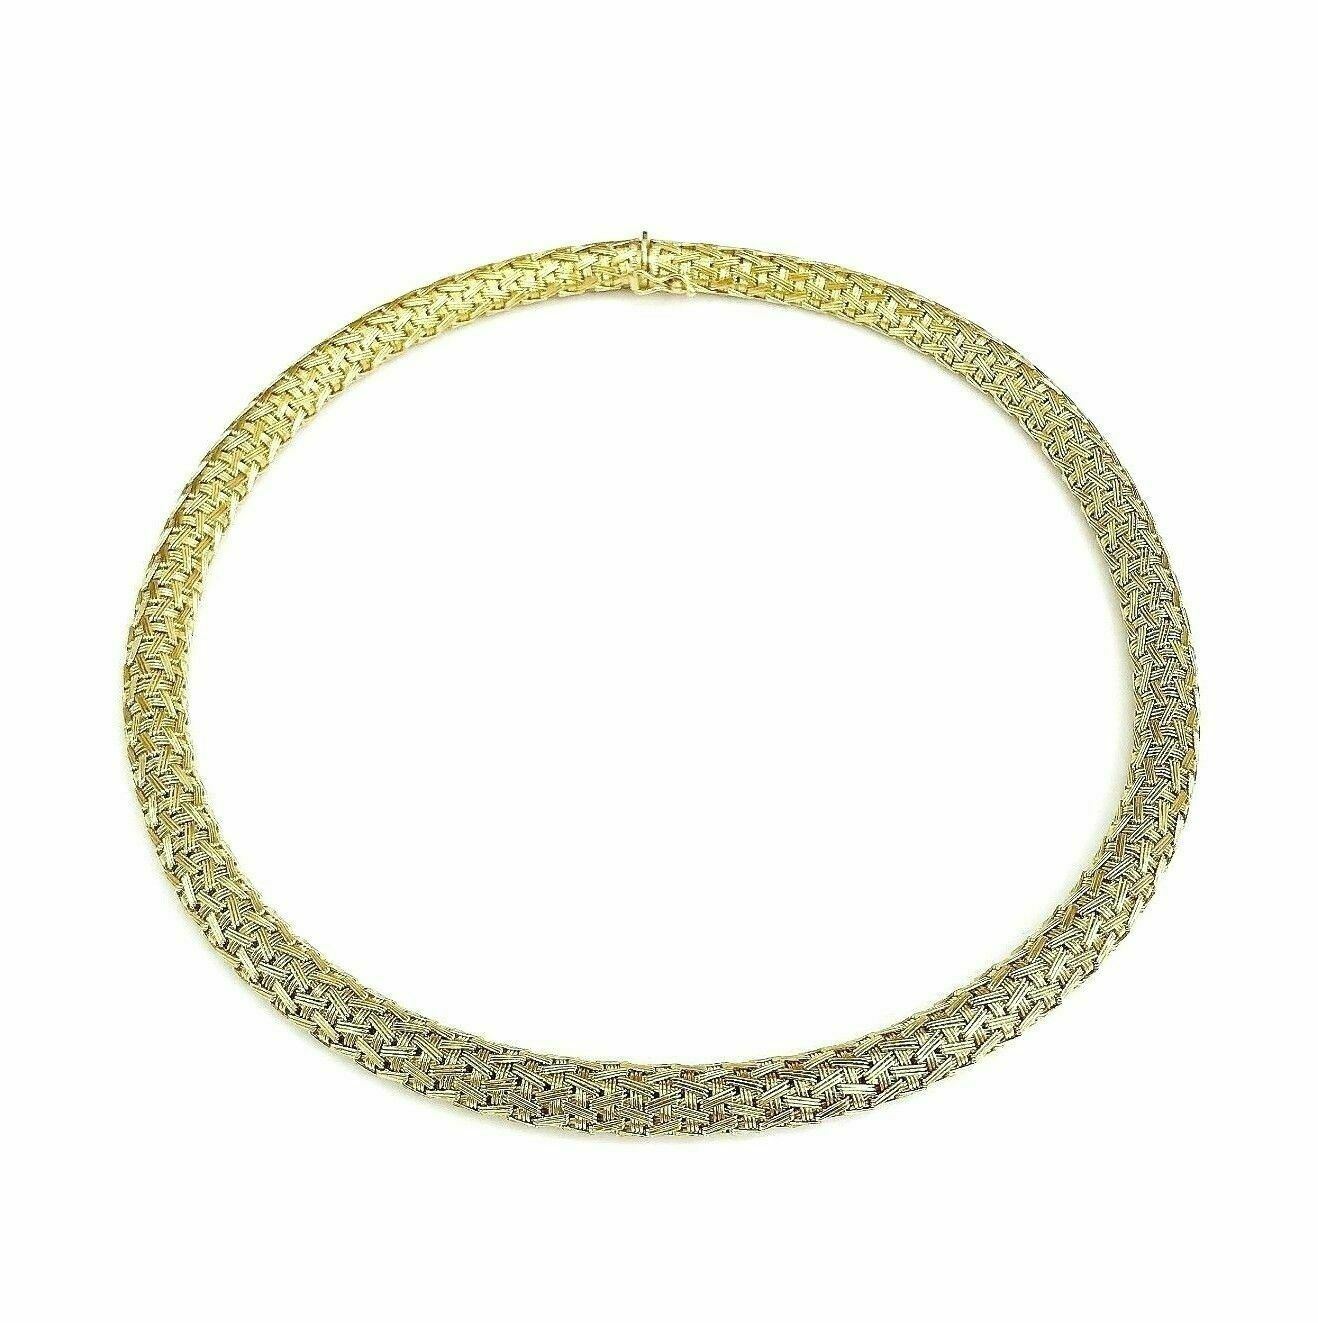 Solid 14K Yellow Gold Basketweave Necklace 16 Inch 2.01 Ounces 1/3 Inch Width